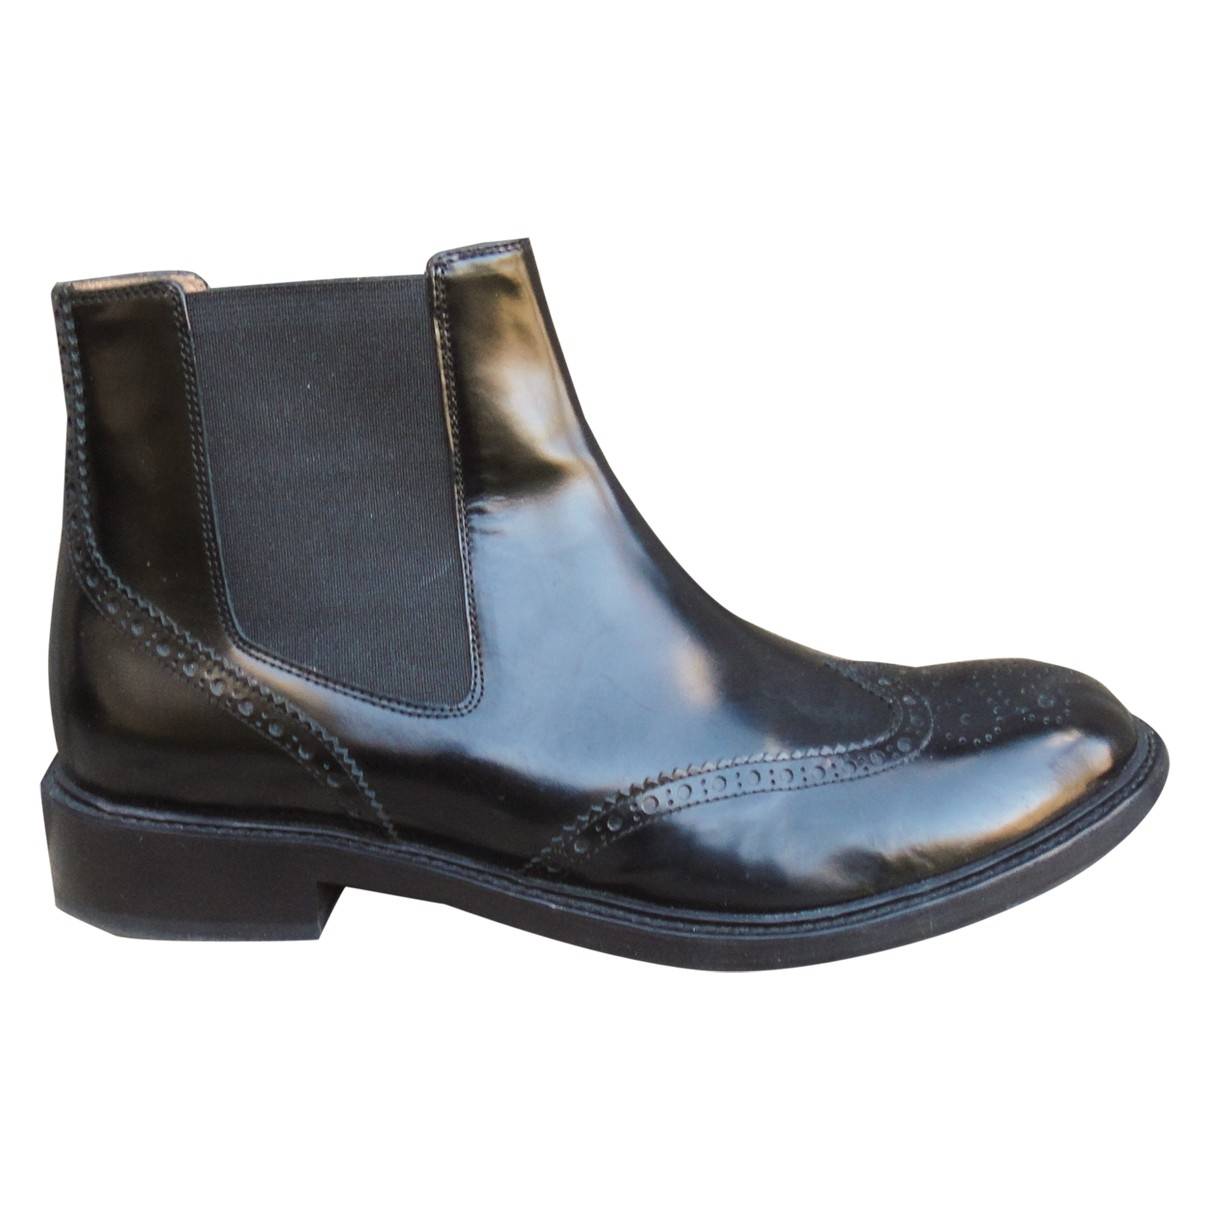 Patent leather boots Fratelli Rossetti